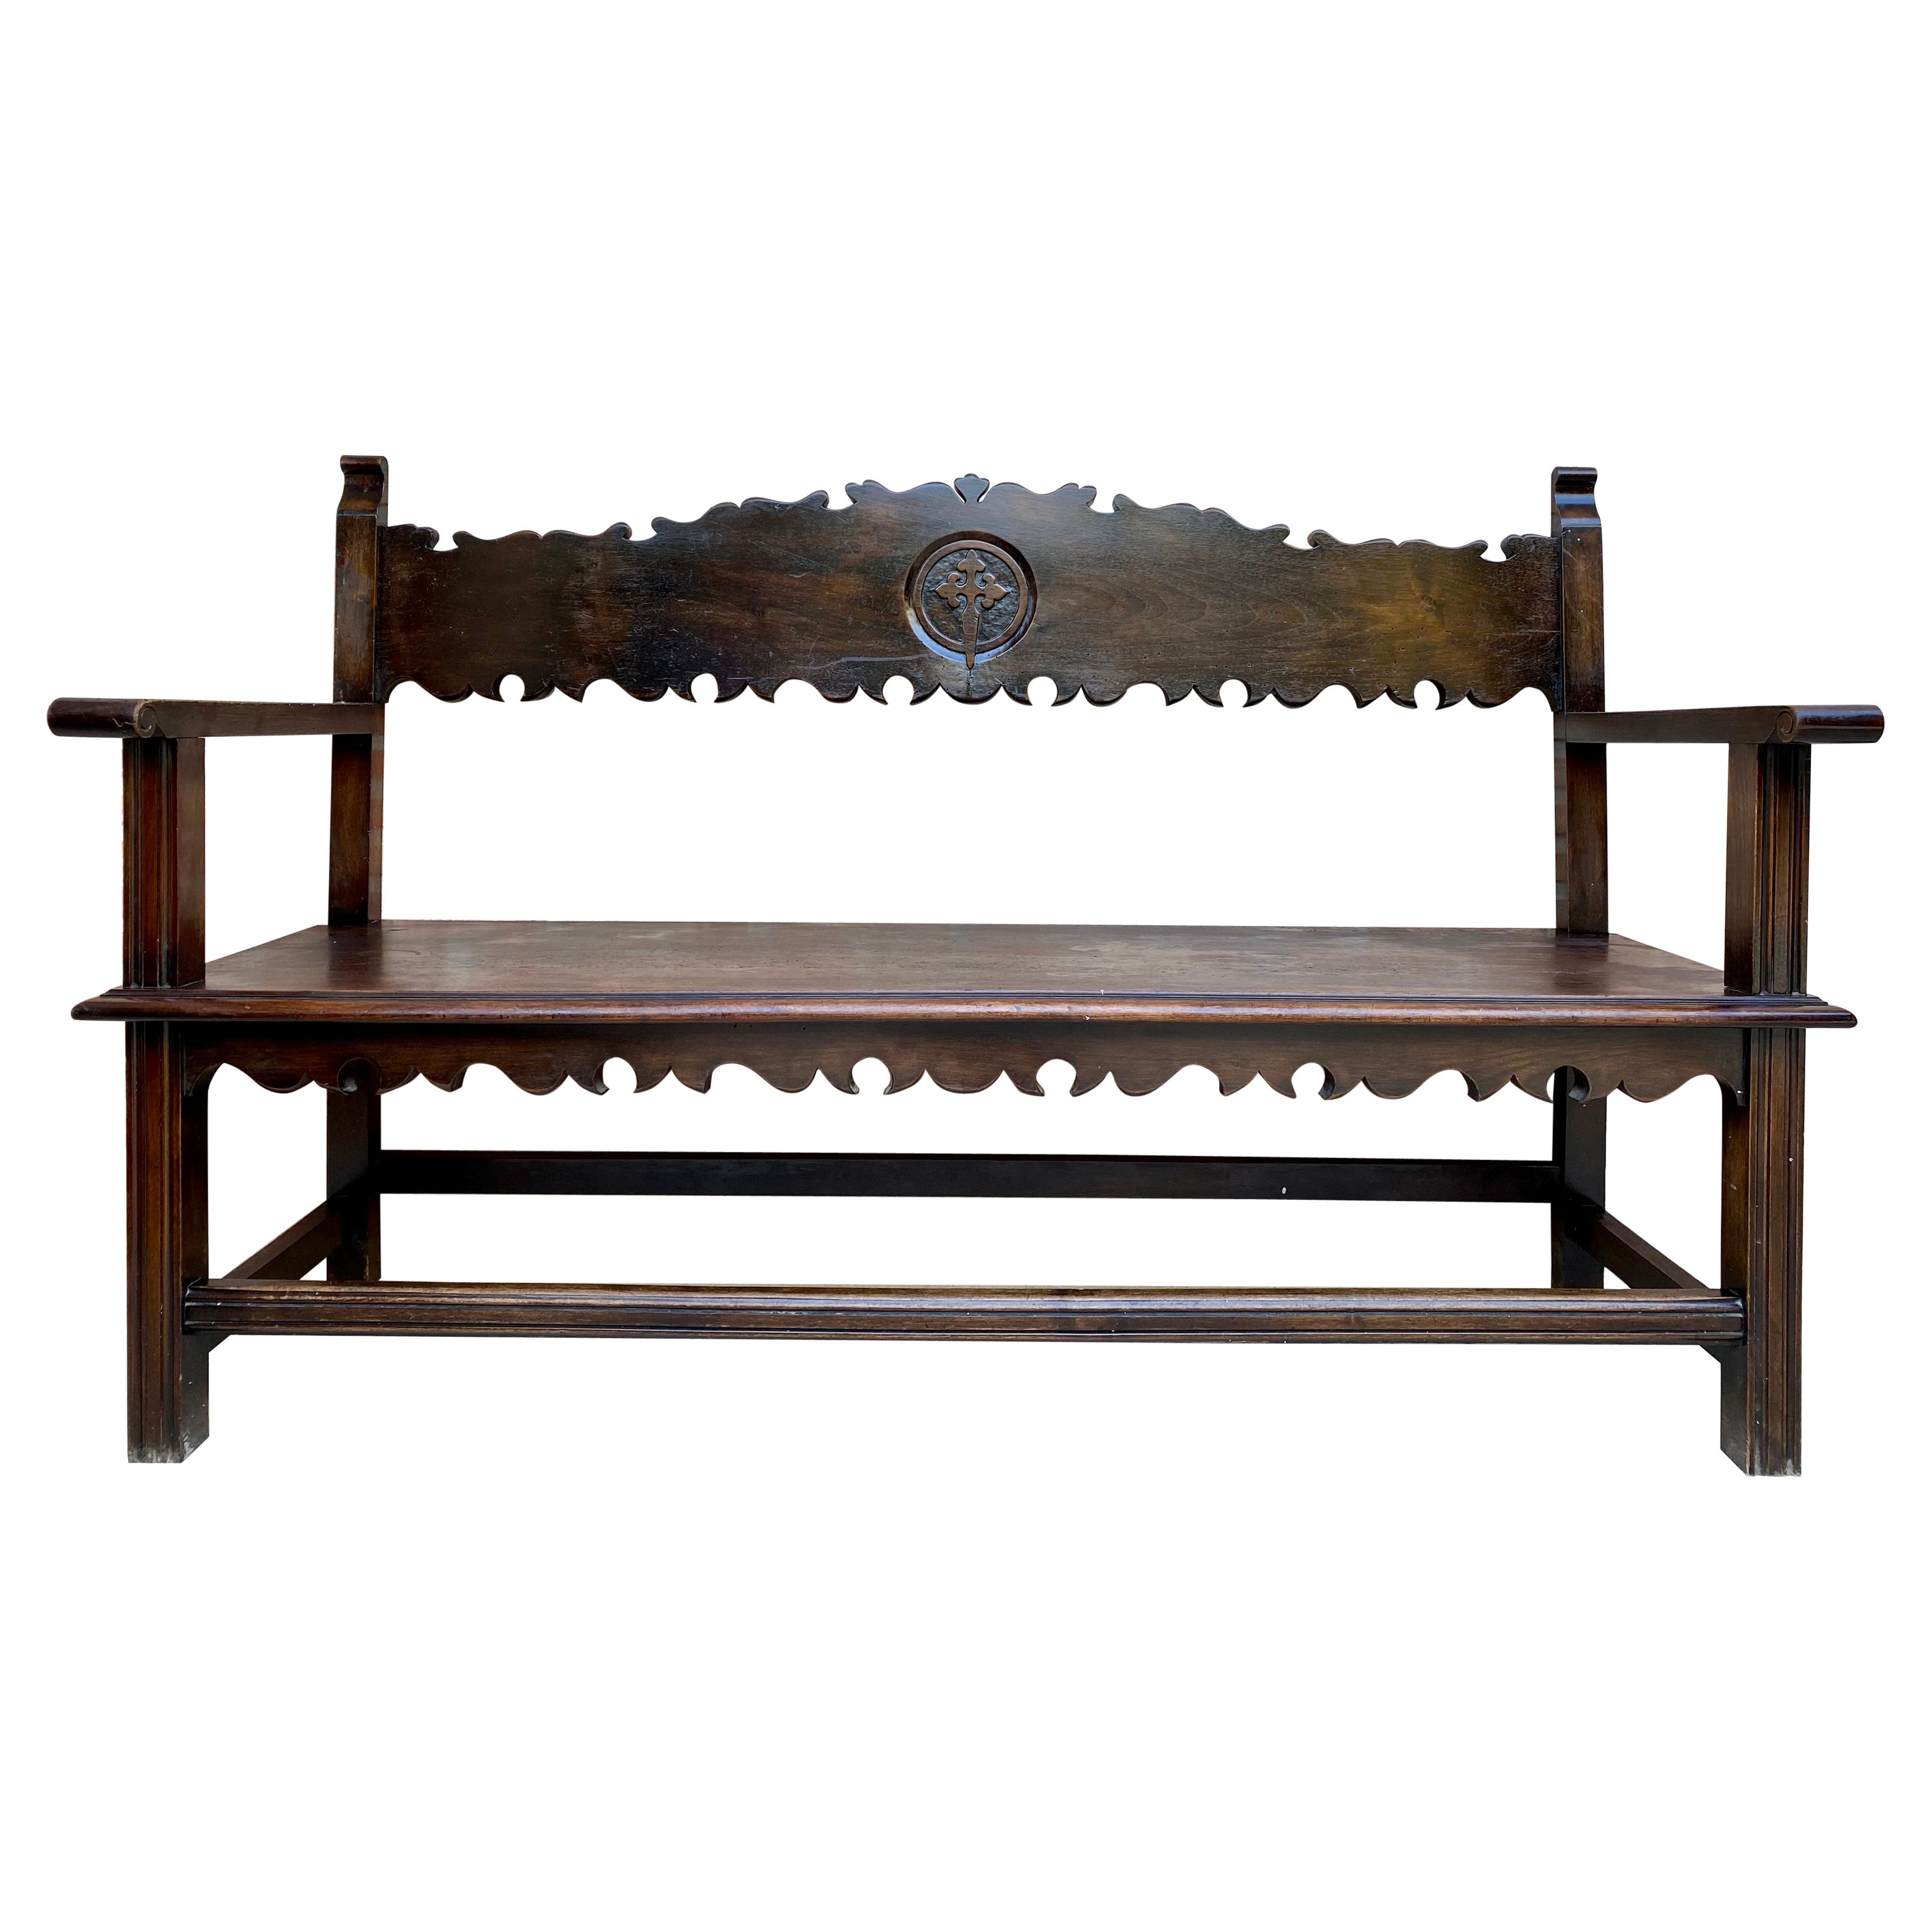 Vintage French Bench in Wood, 1920